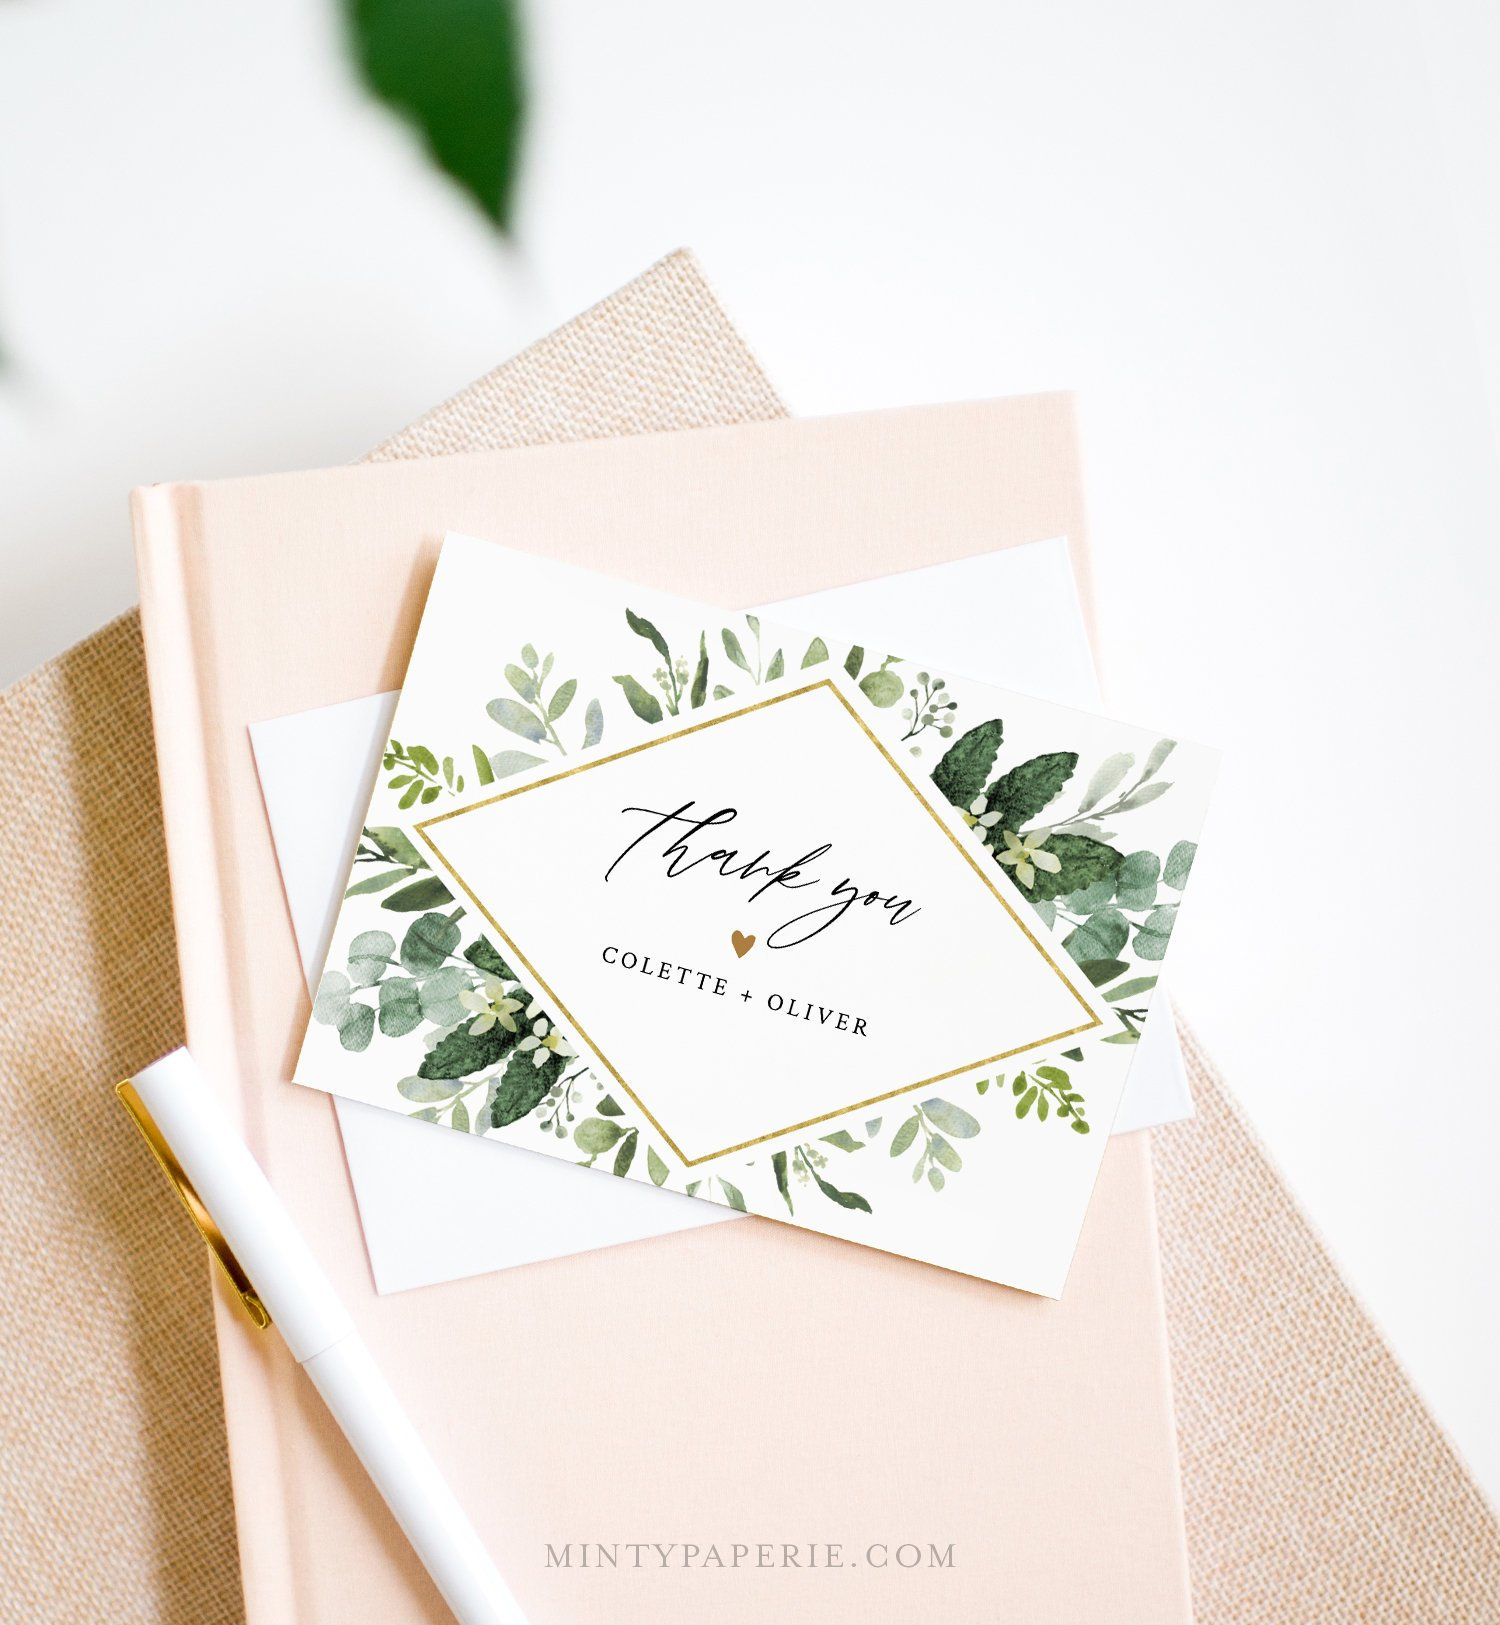 Thank You Note Card Template, Printable Greenery & Gold Wedding / Bridal  Shower Folded Card, Instant Download, Editable Text #082 124Tyc Inside Thank You Note Card Template